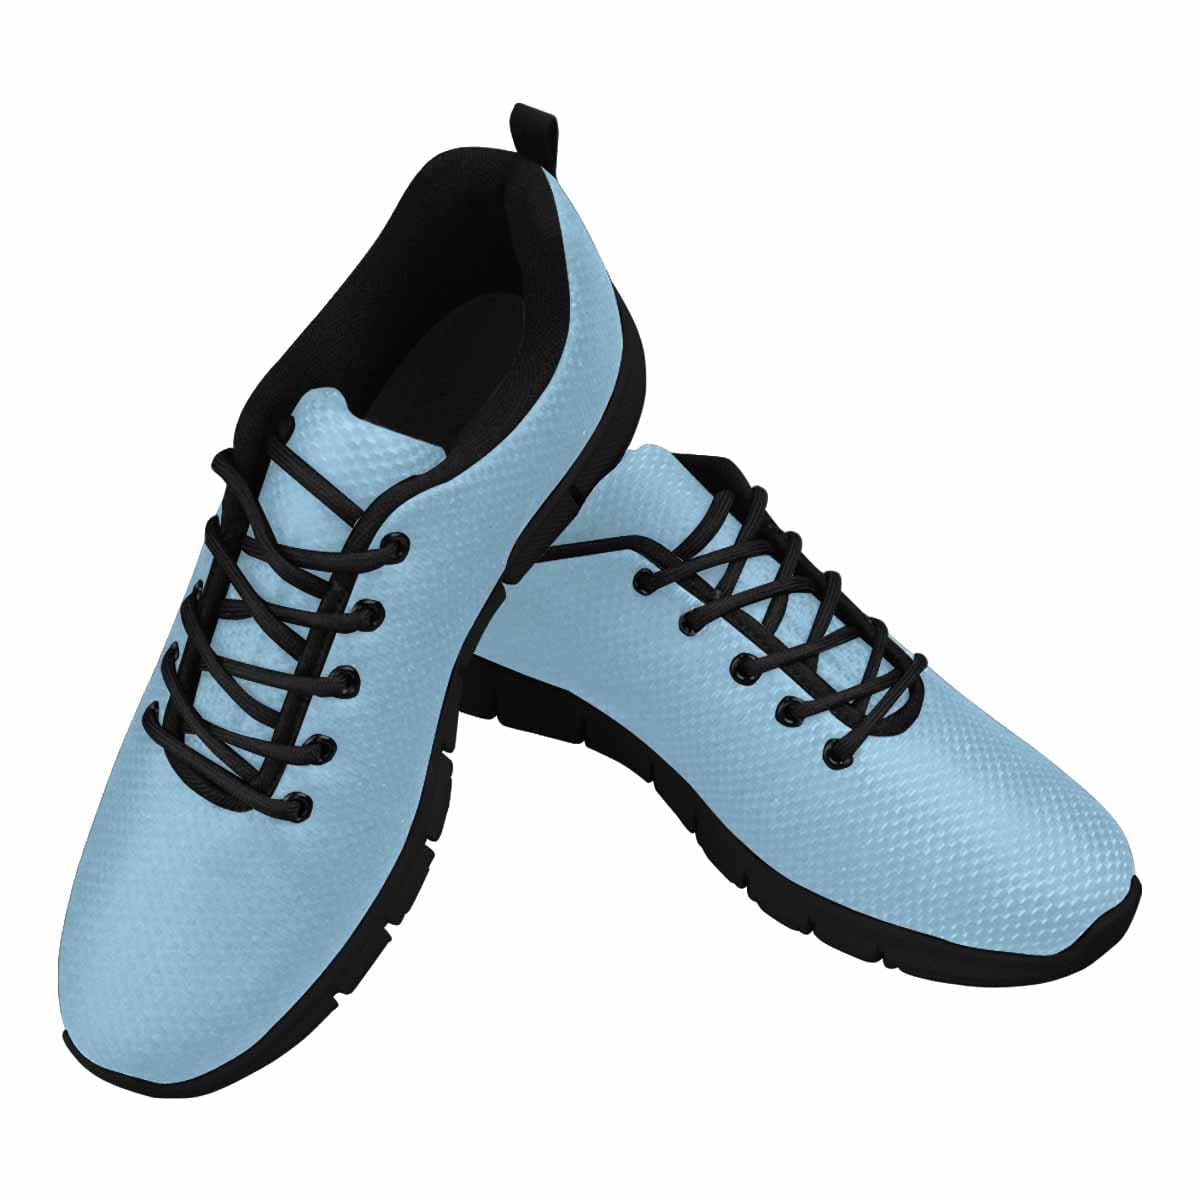 Sneakers For Men Cornflower Blue - Canvas Mesh Athletic Running Shoes - Mens